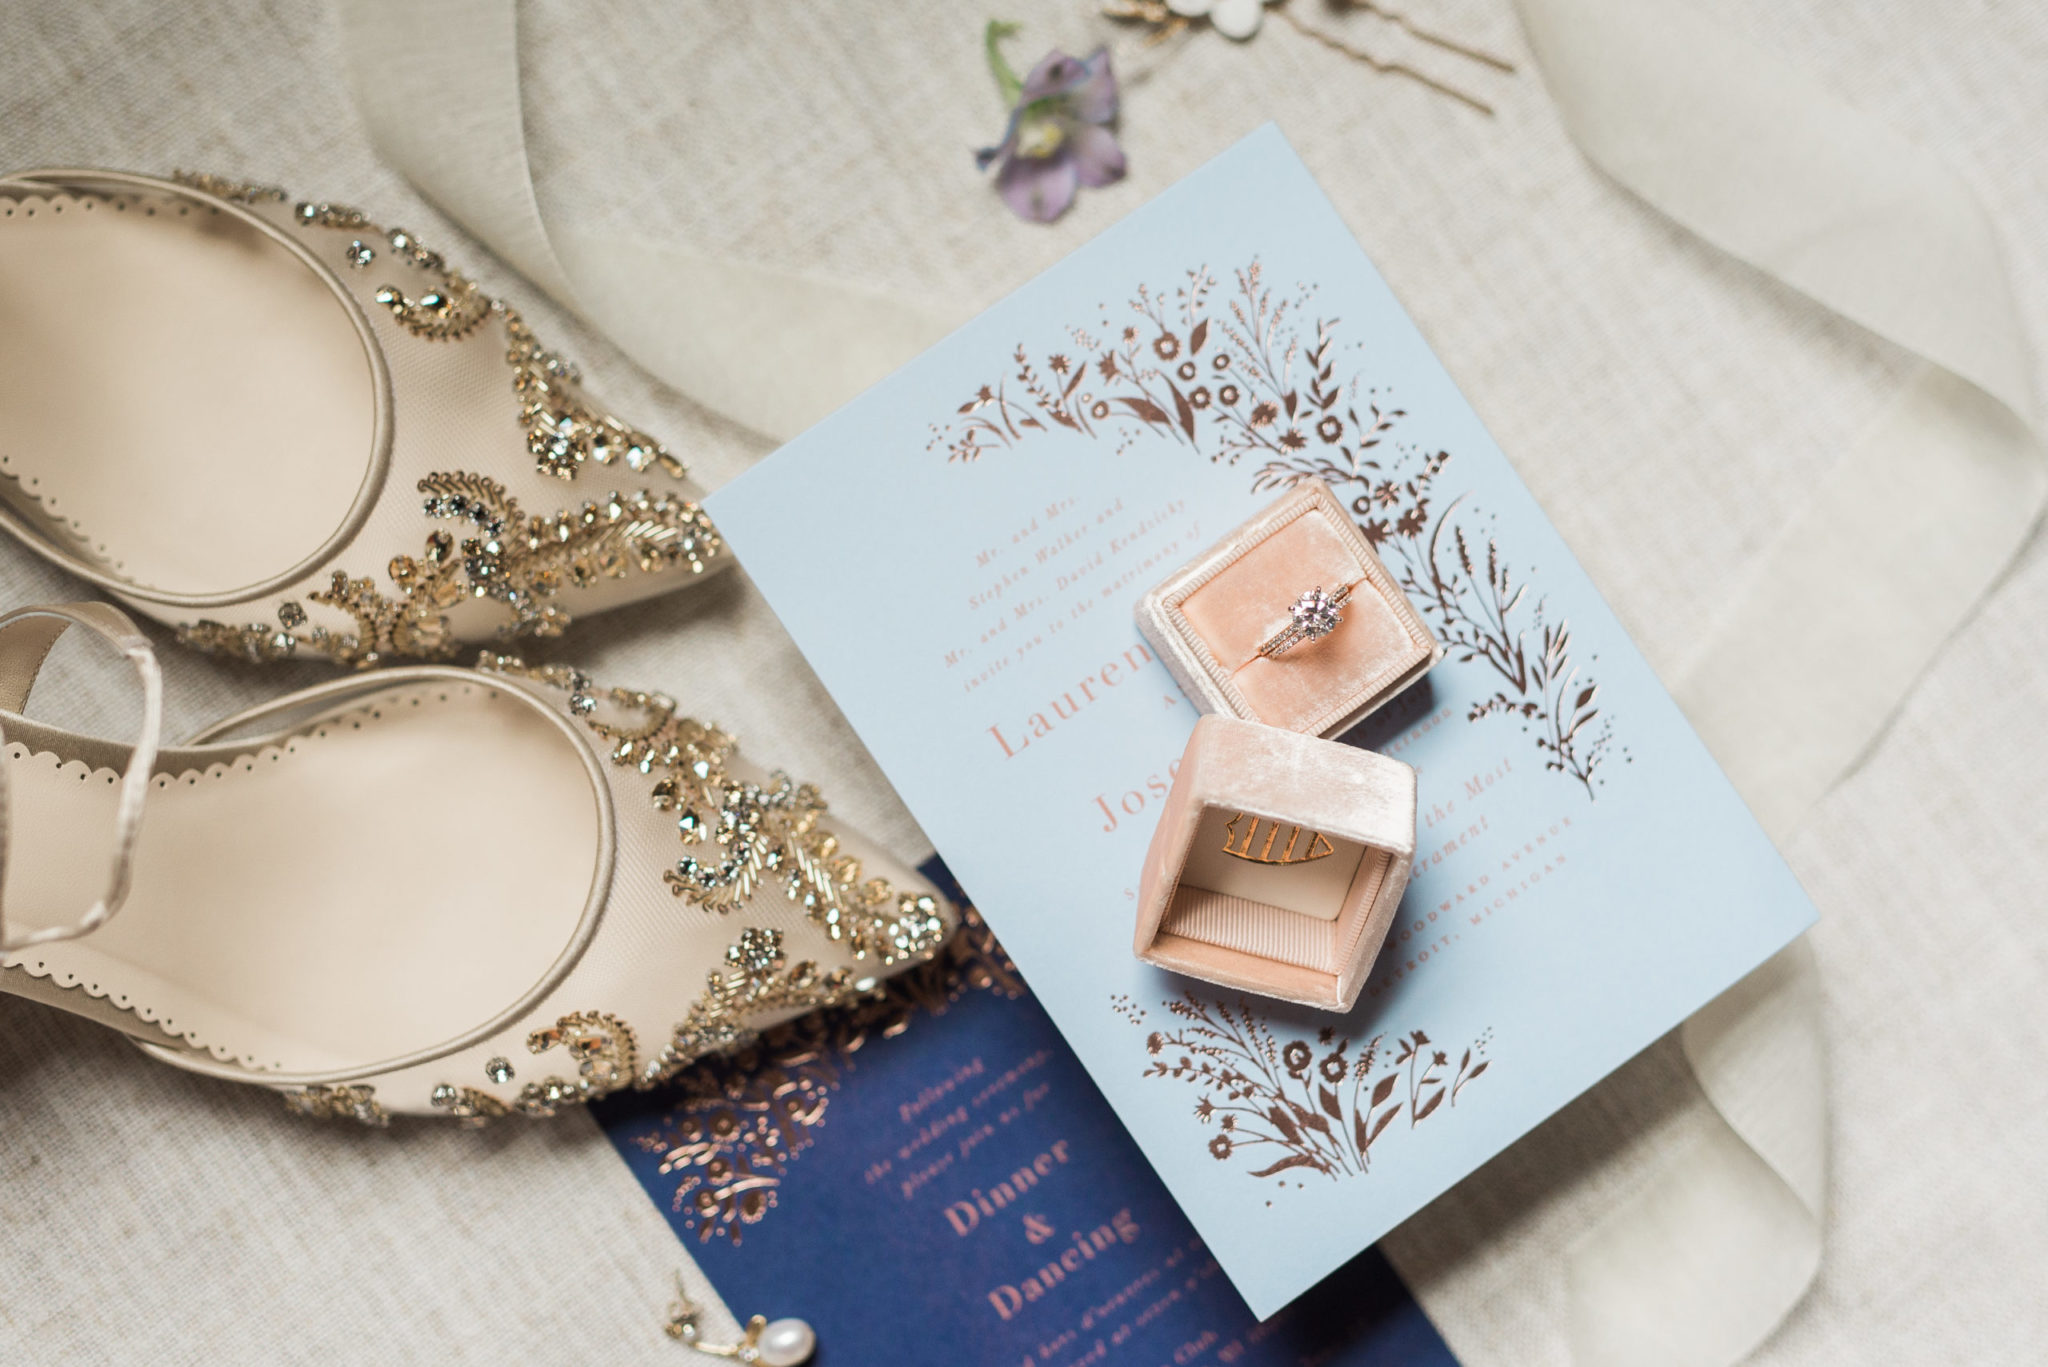 wedding day details including shoes, ring, and stationary wedding invitations